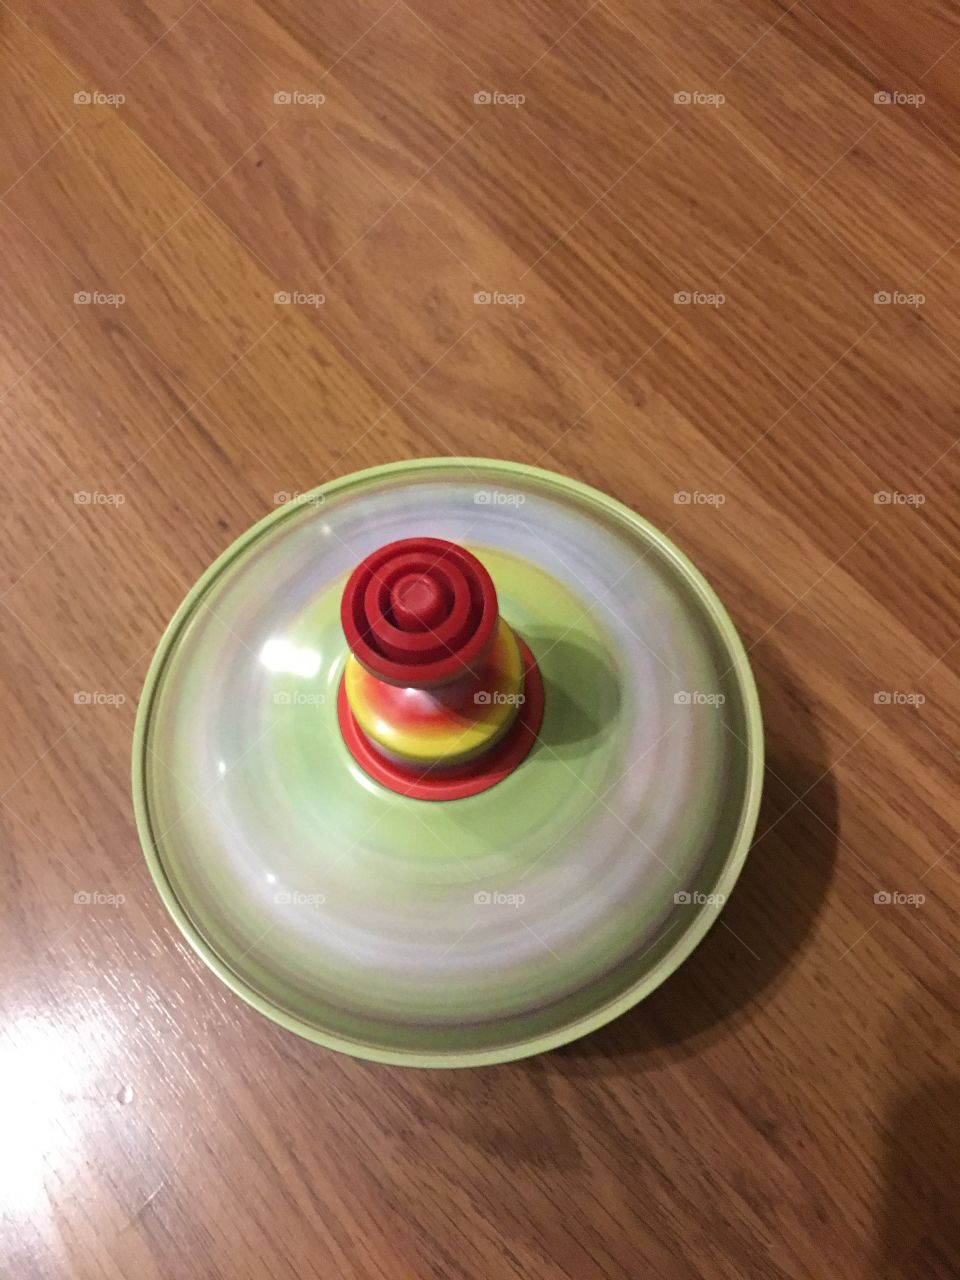 Old fashioned spinning top toy